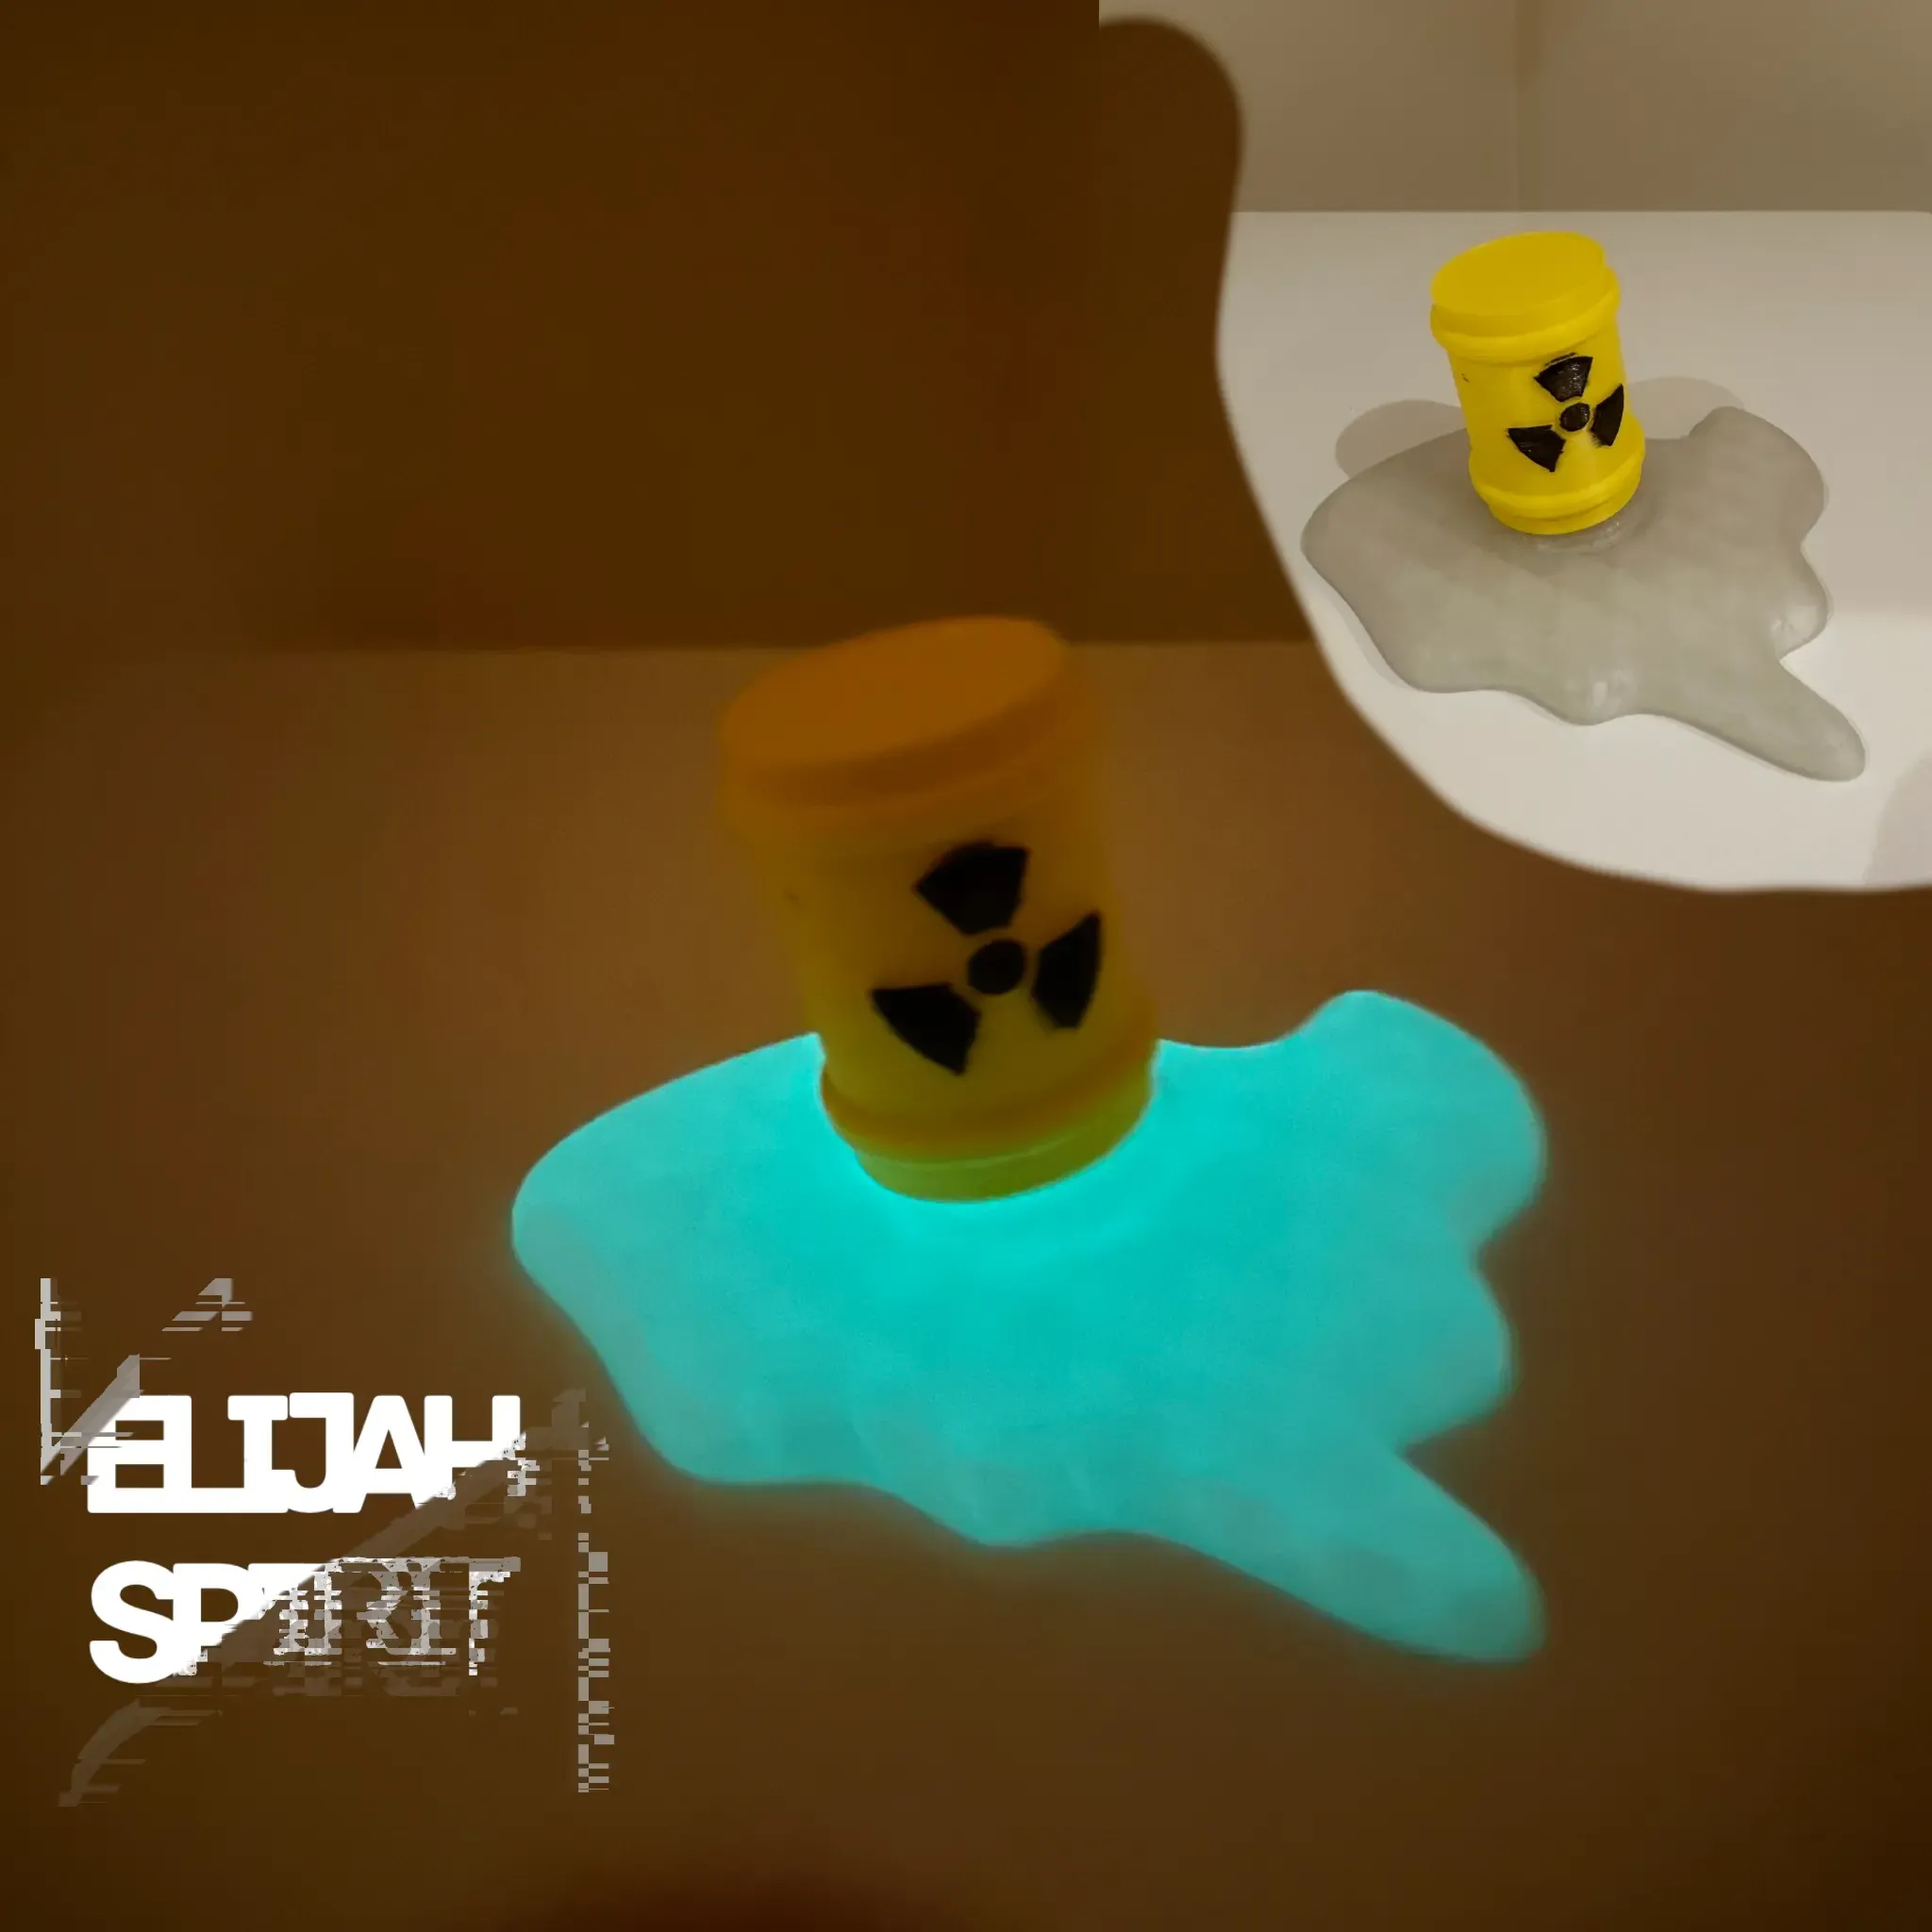 Radioactive barrel with puddle. (Glow in the dark)